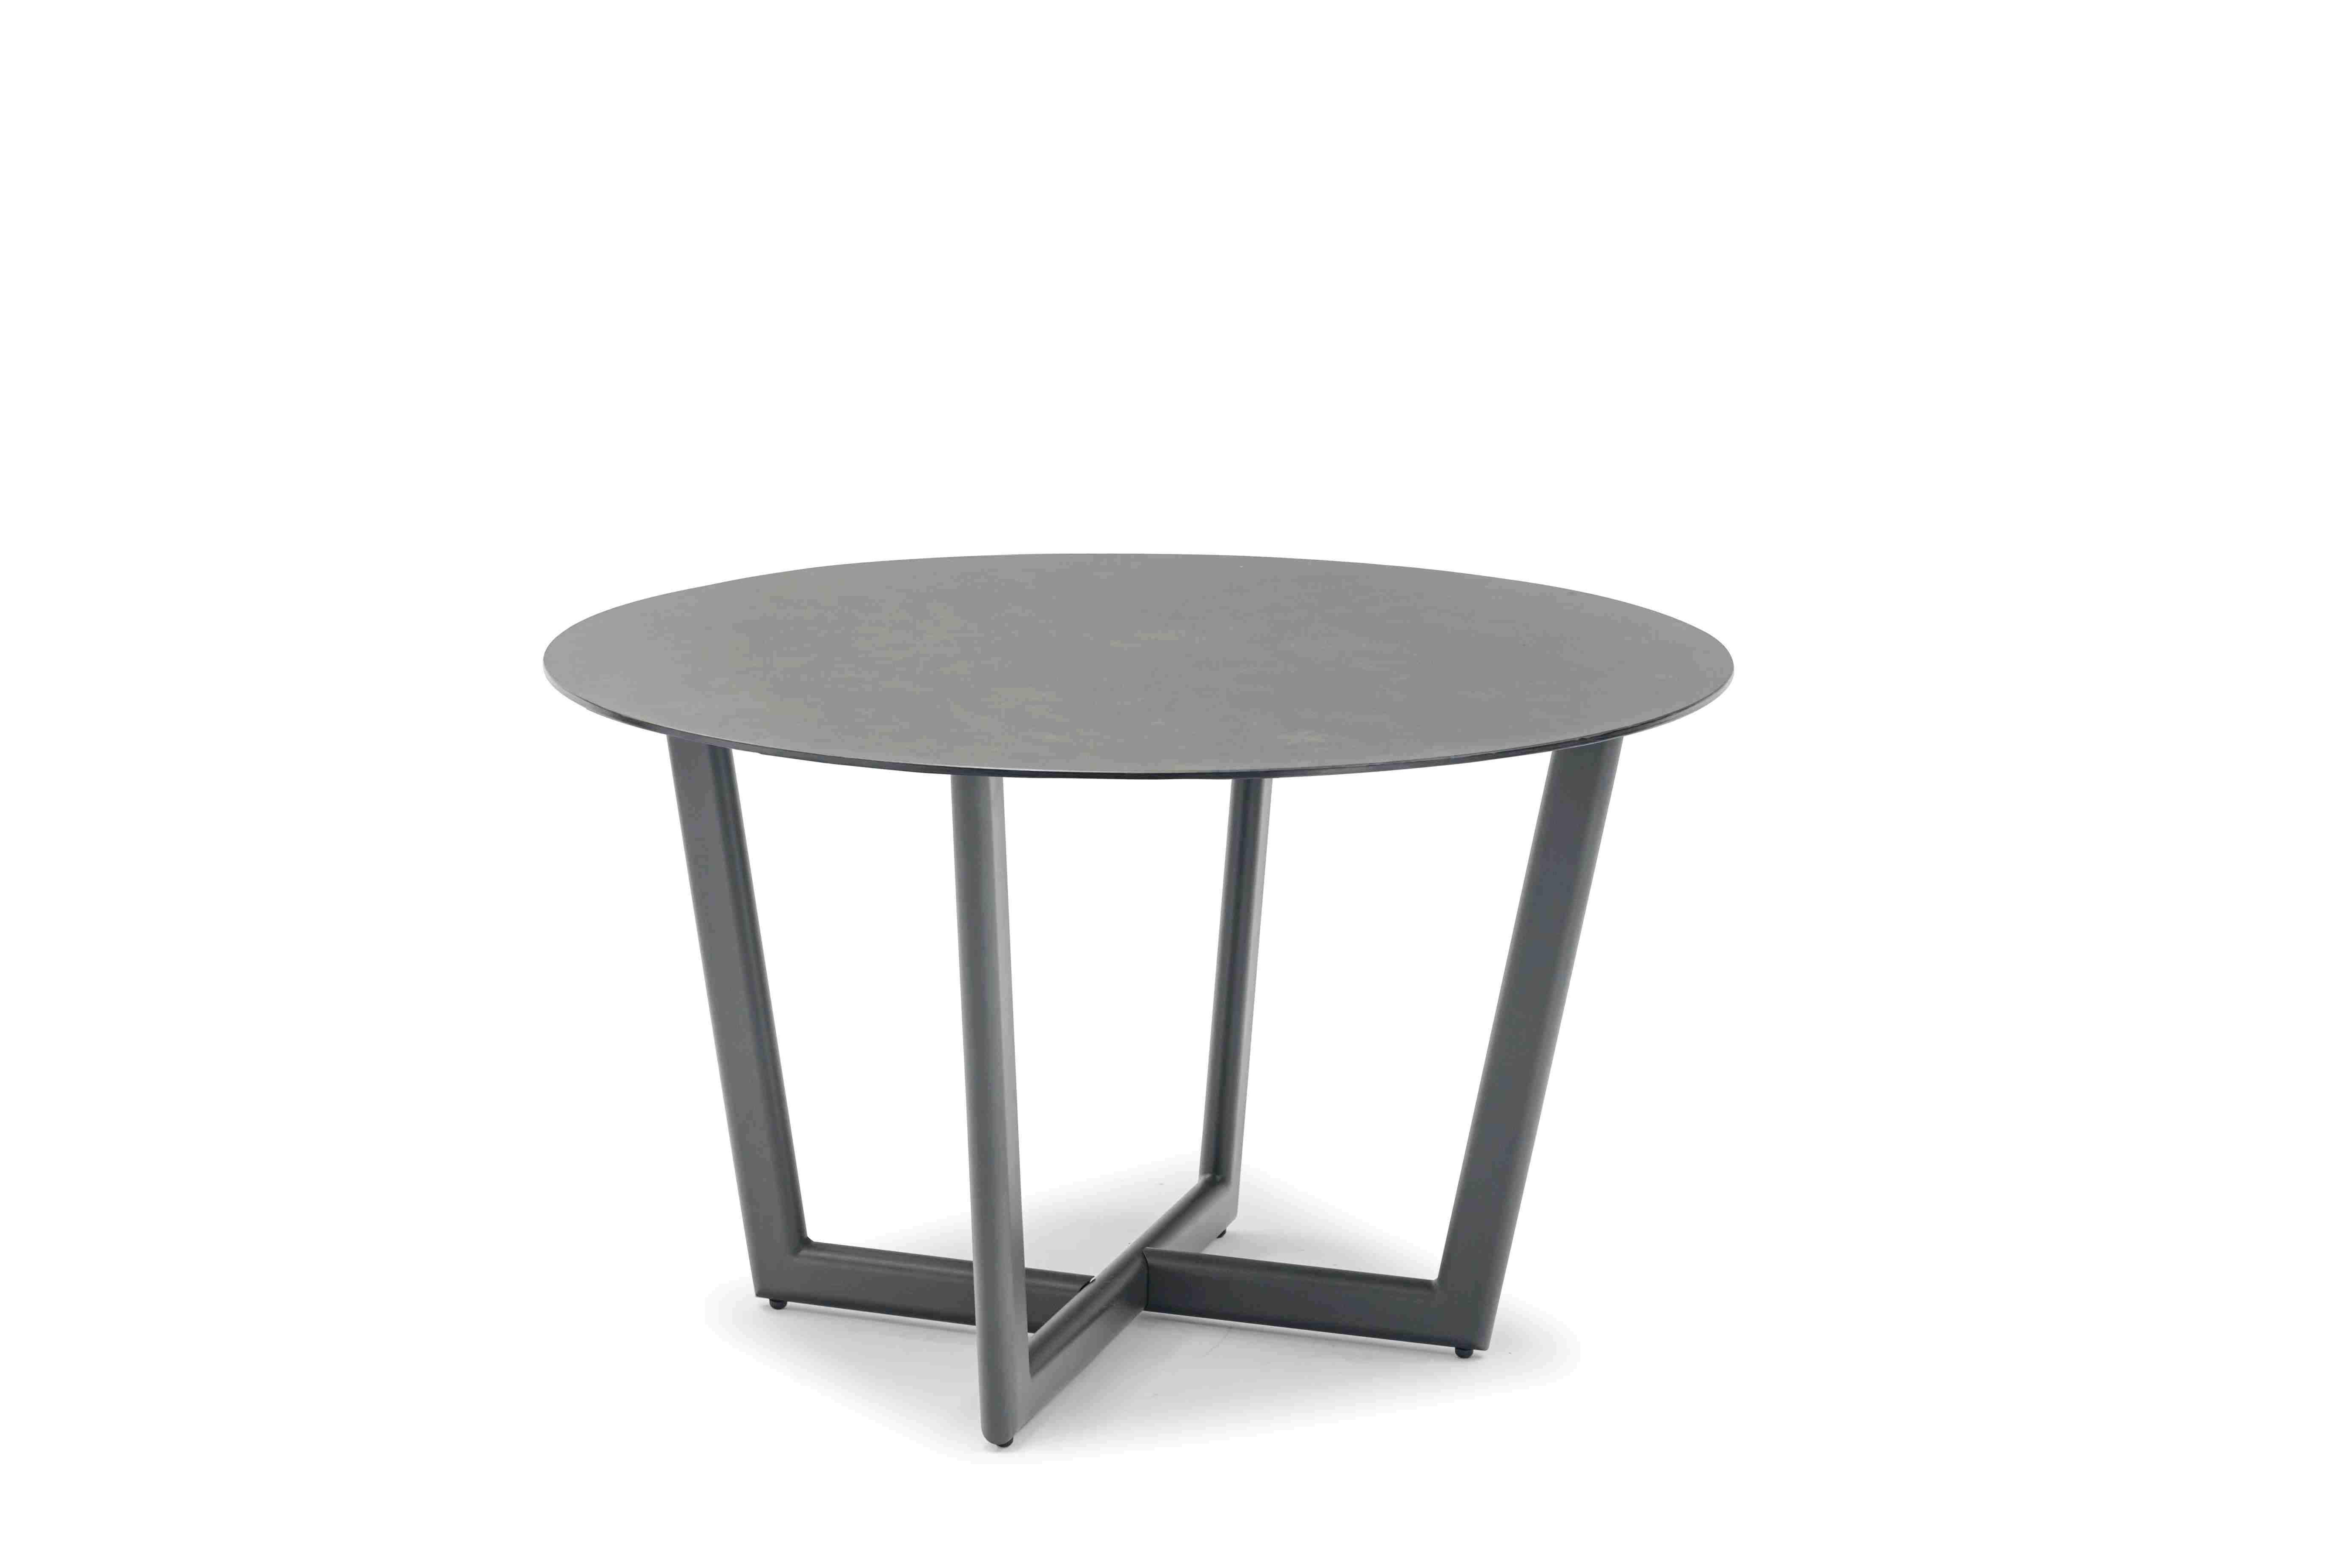 CLUB square dining table